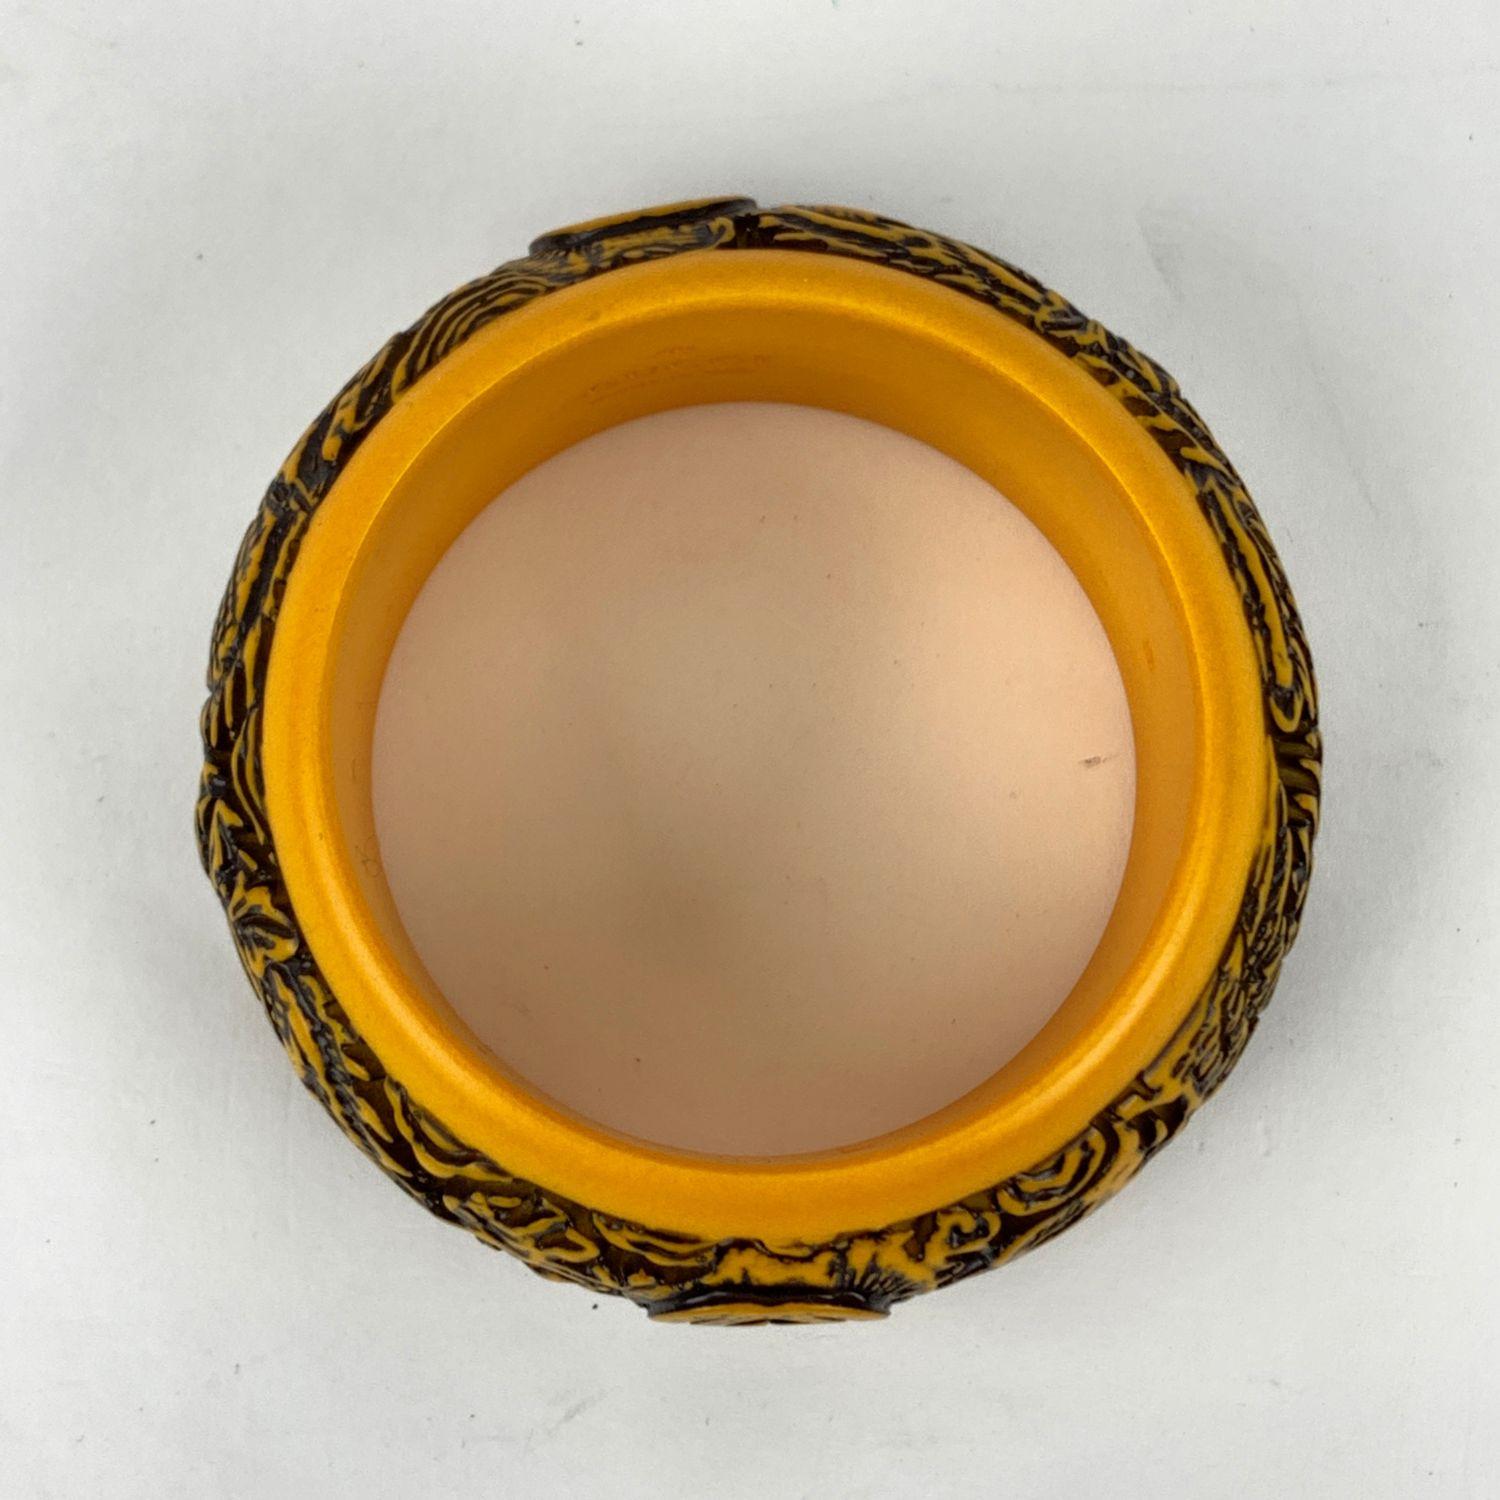 Beautiful bangle bracelet by Gucci, from the 2018 Fall collection. Made in yellow resin. It features a stunning engraved dragon motif with carved Gucci Logo on top. Size: S. Inner circumference: 7.5 inches - 19 cm. Inner diameter: 2.5 inches - 6 cm.